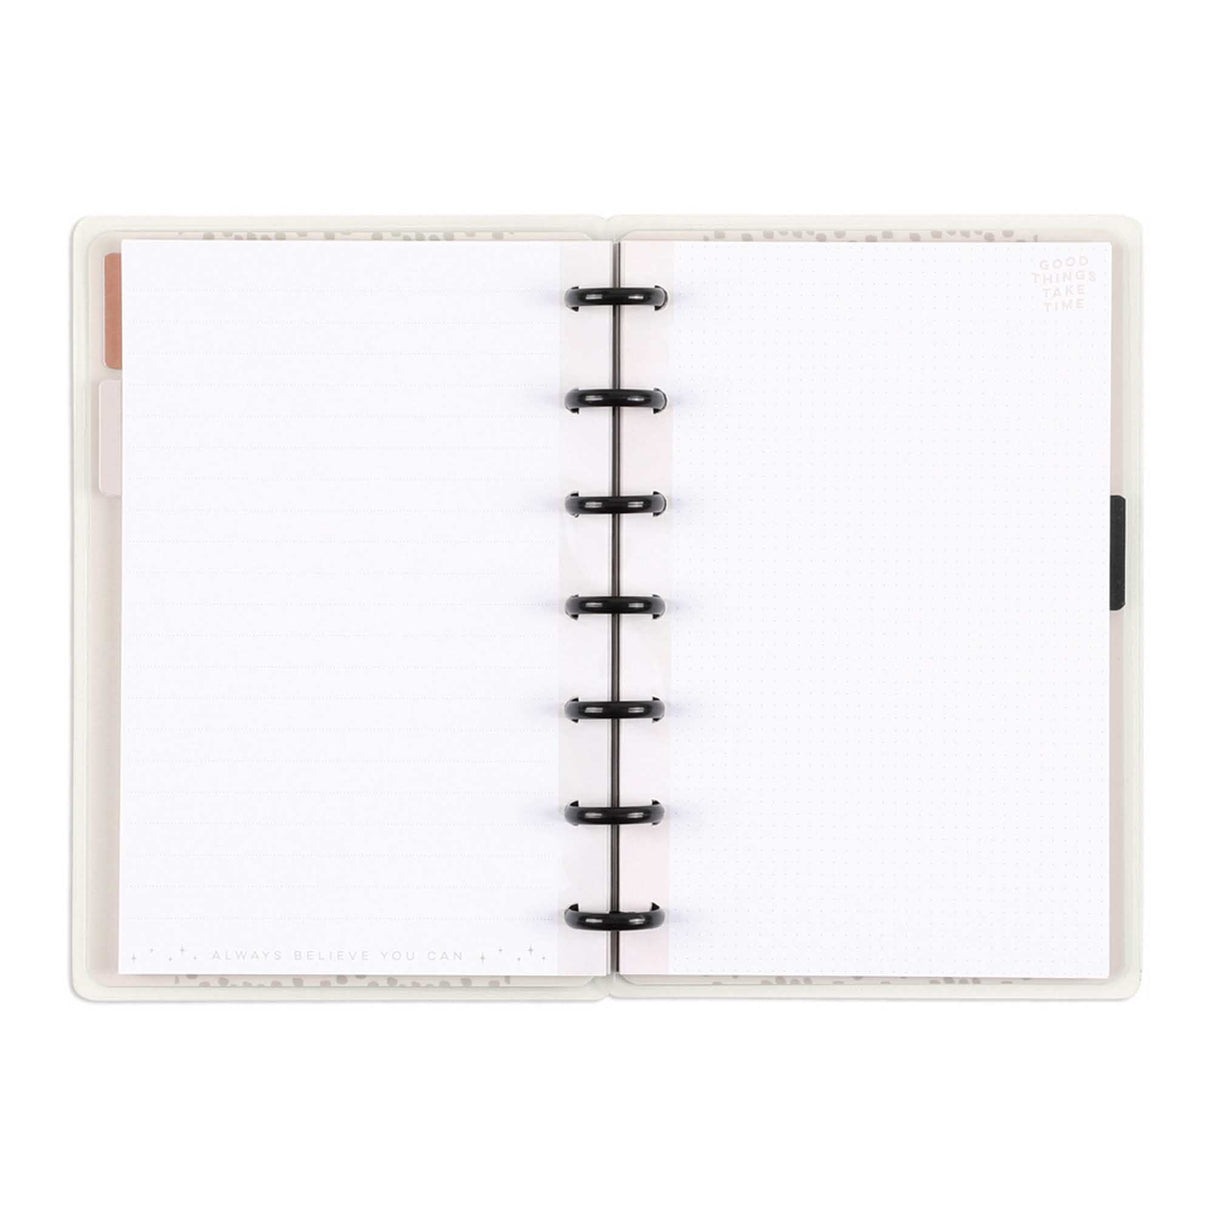 Happy Planner Taming The Wild Mini Notebook - Lined + Dot Grid